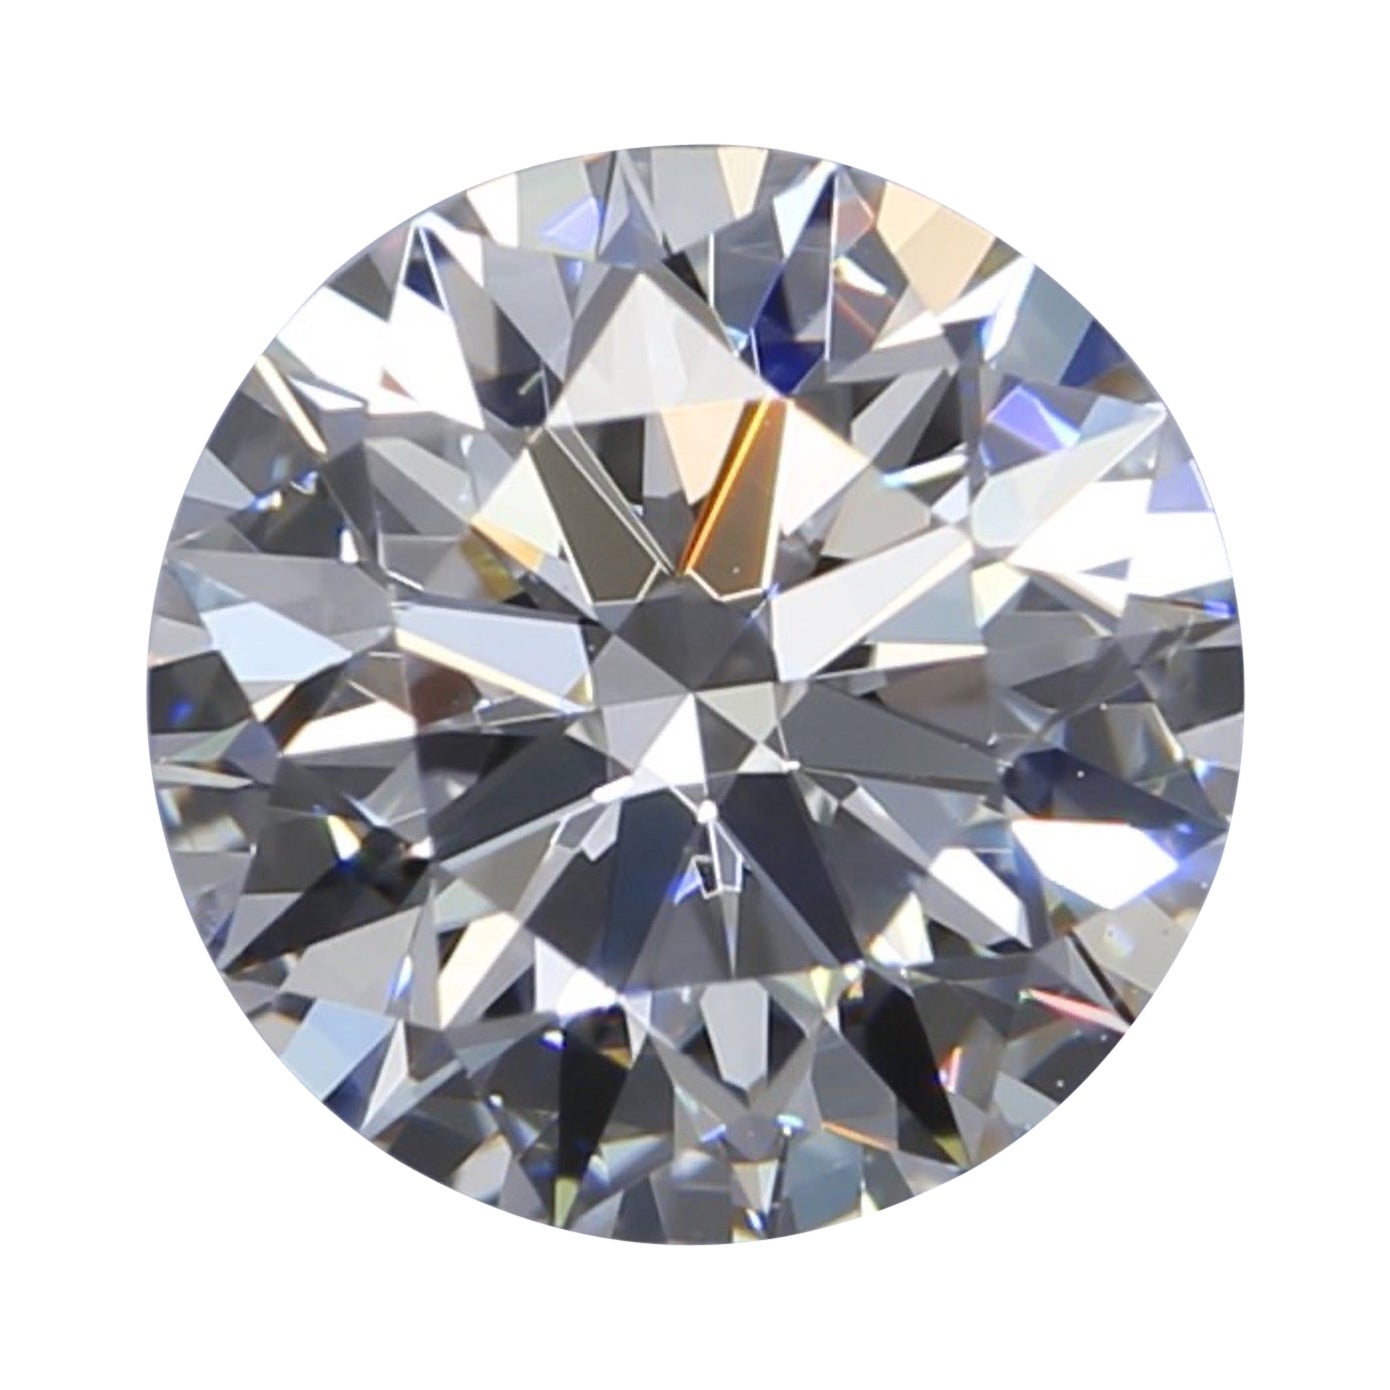 Gia Certified 302 Carat M Vs2 Round Brilliant Cut Diamond For Sale At